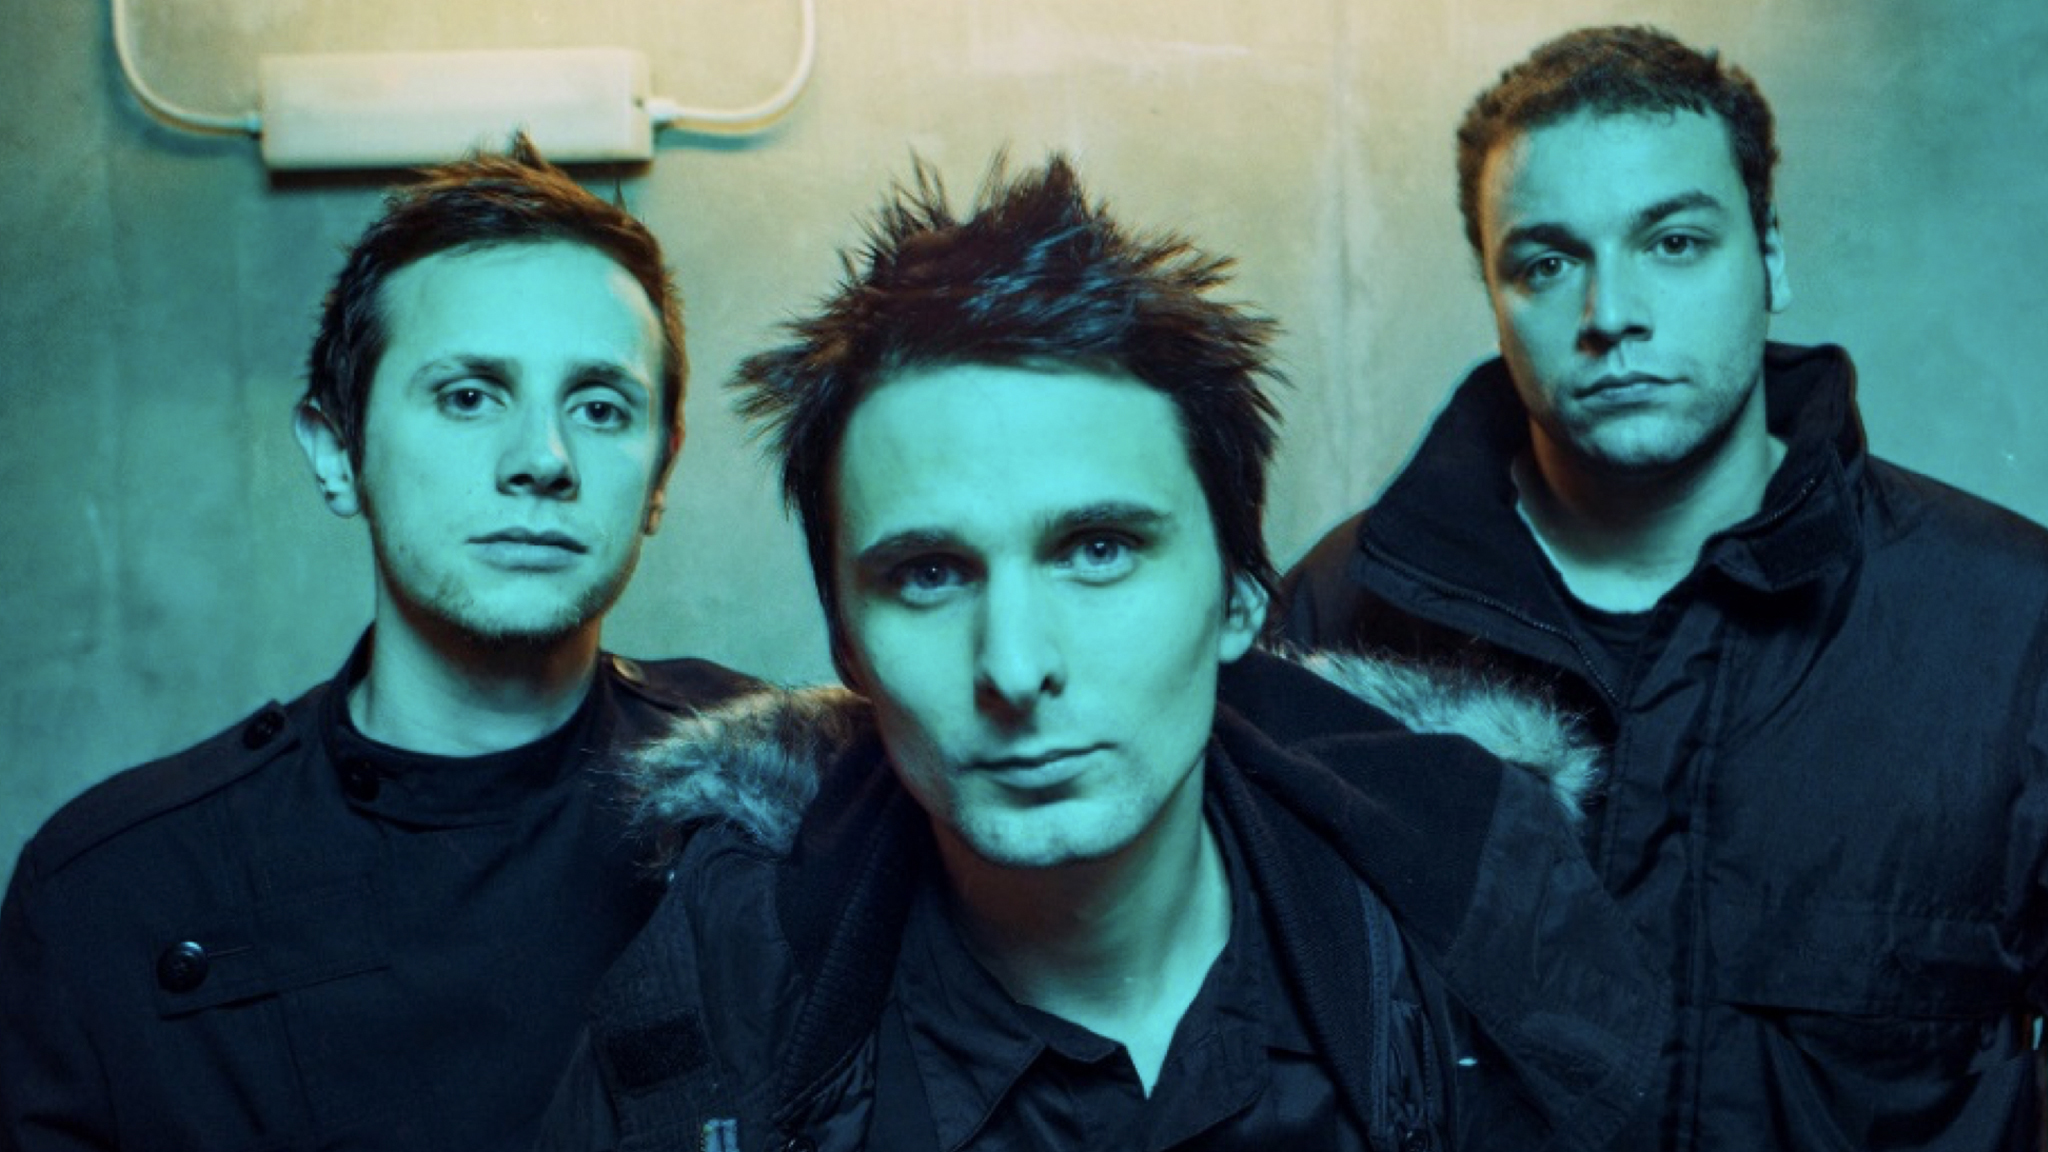 muse absolution tour